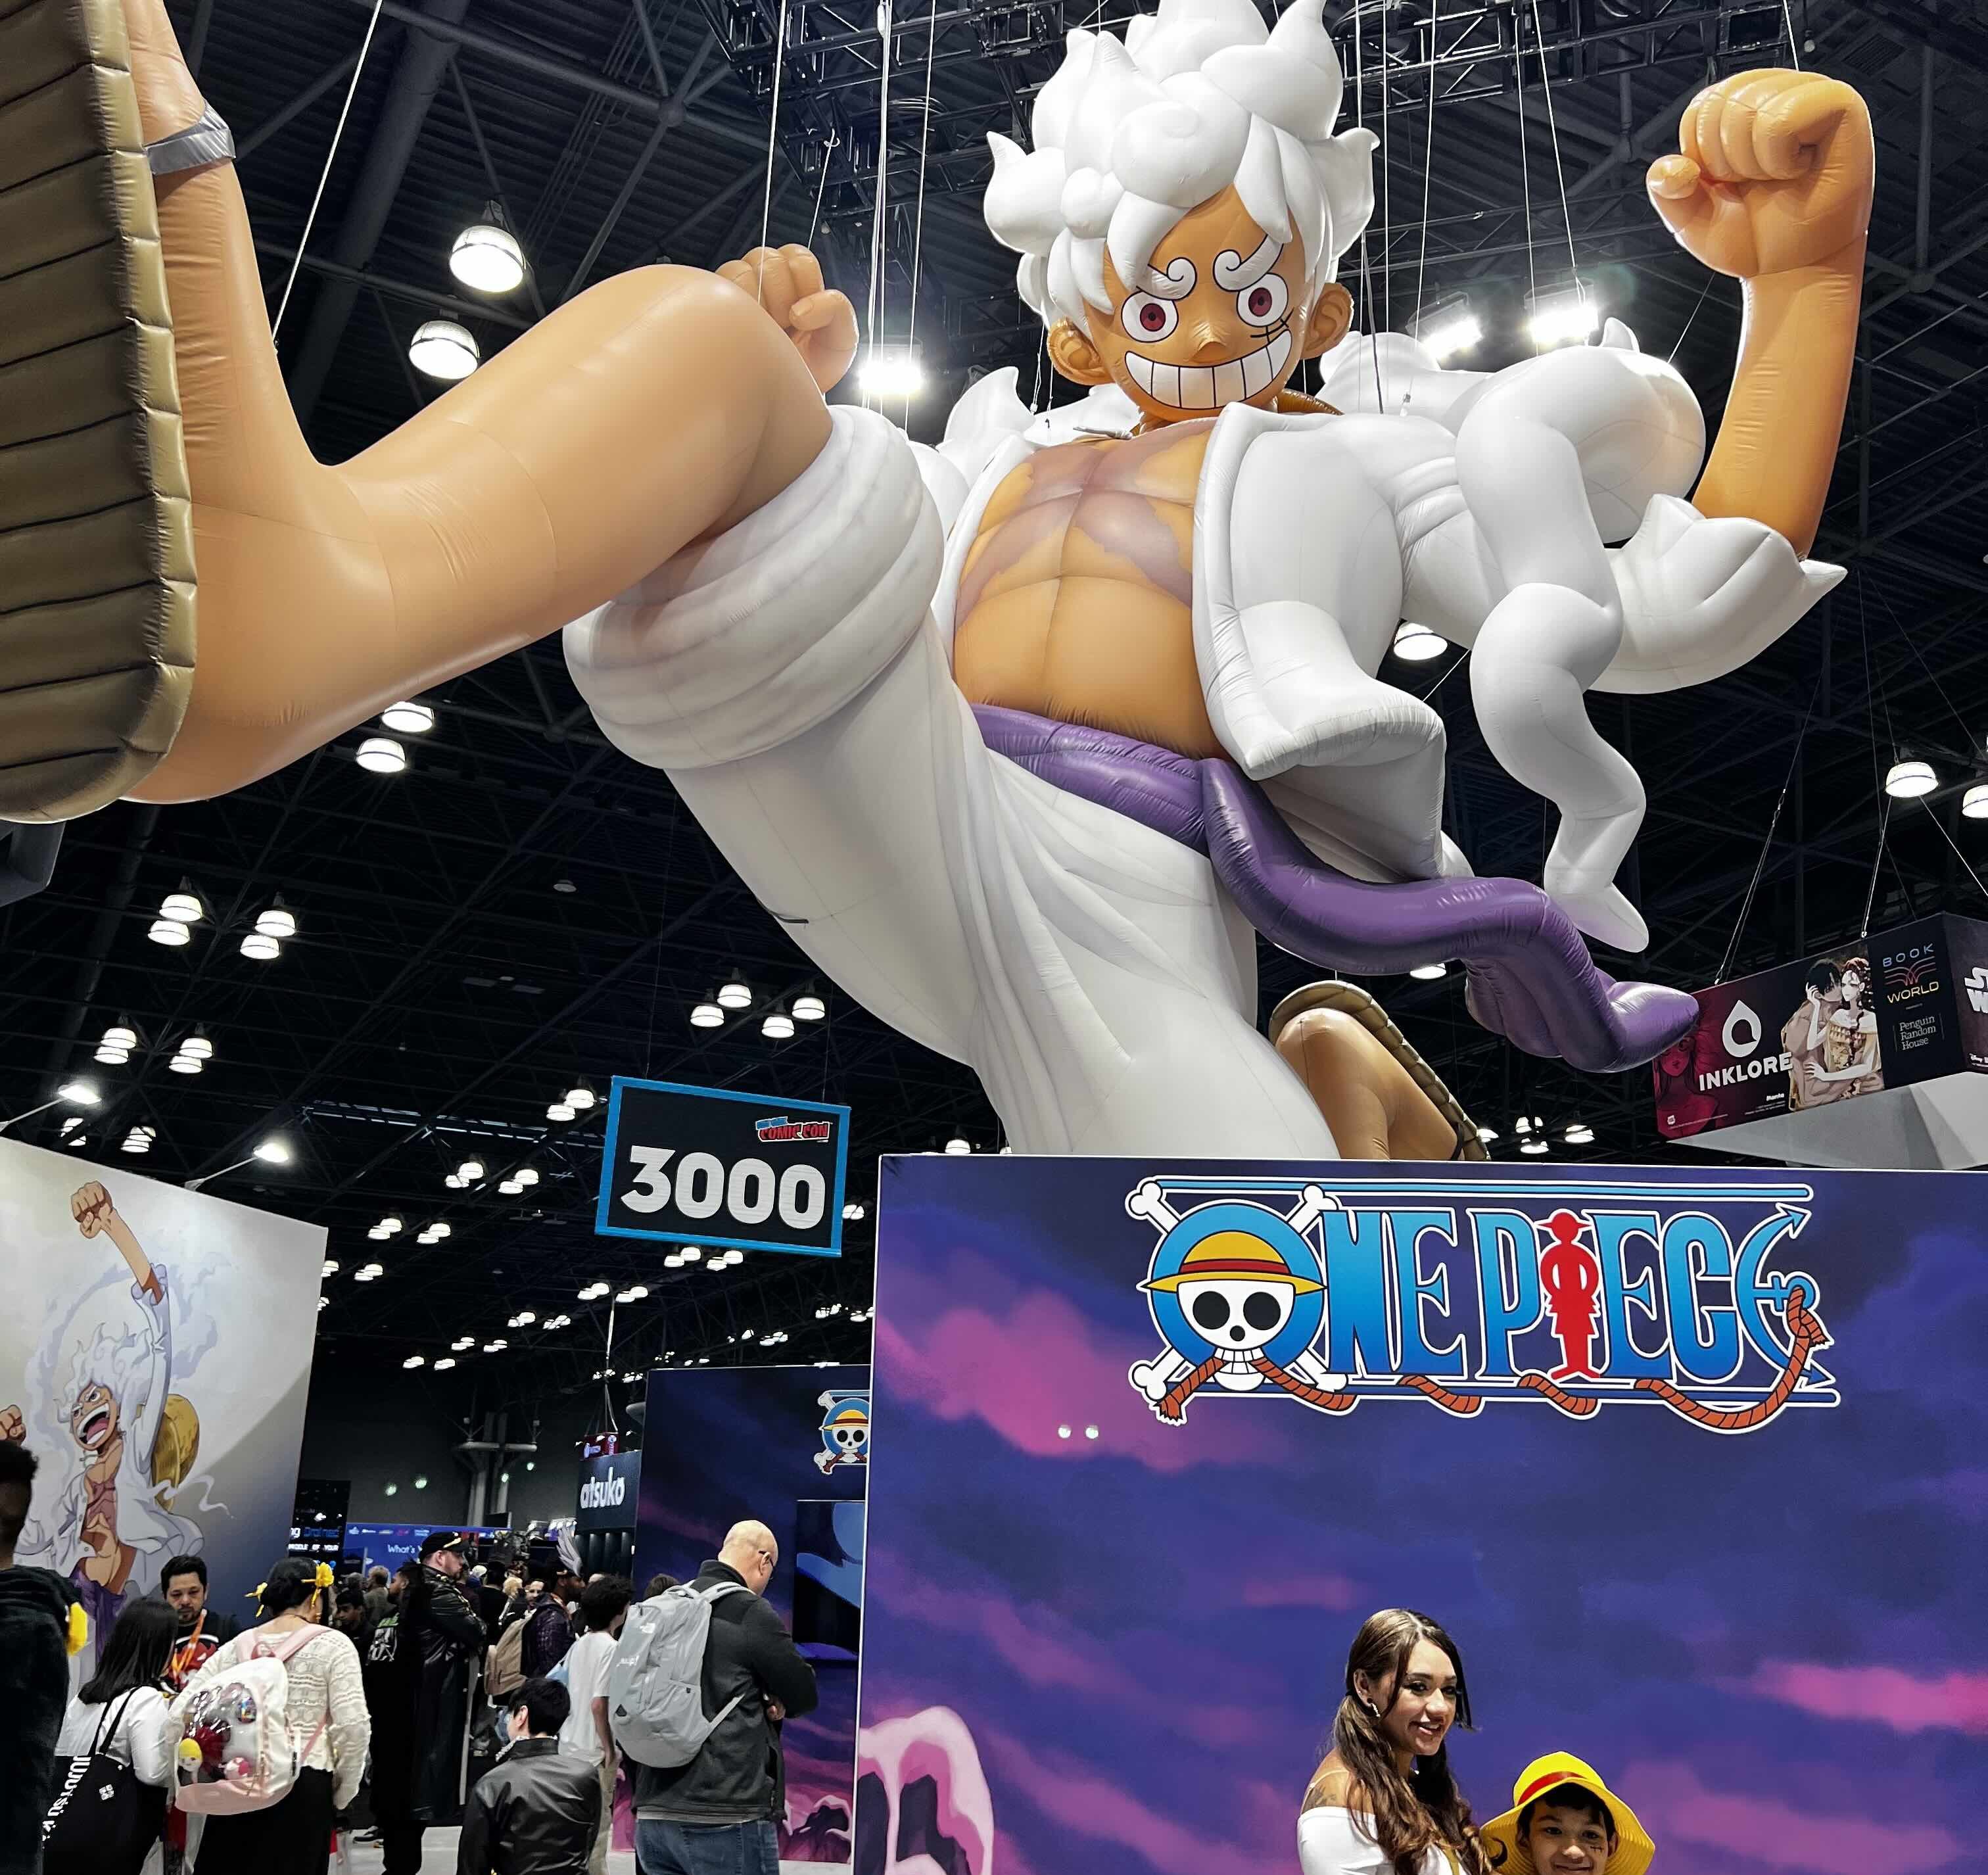 Square Enix Manga And Books Gives Fans A Little Bit Of Everything At Anime  Expo - Crunchyroll News